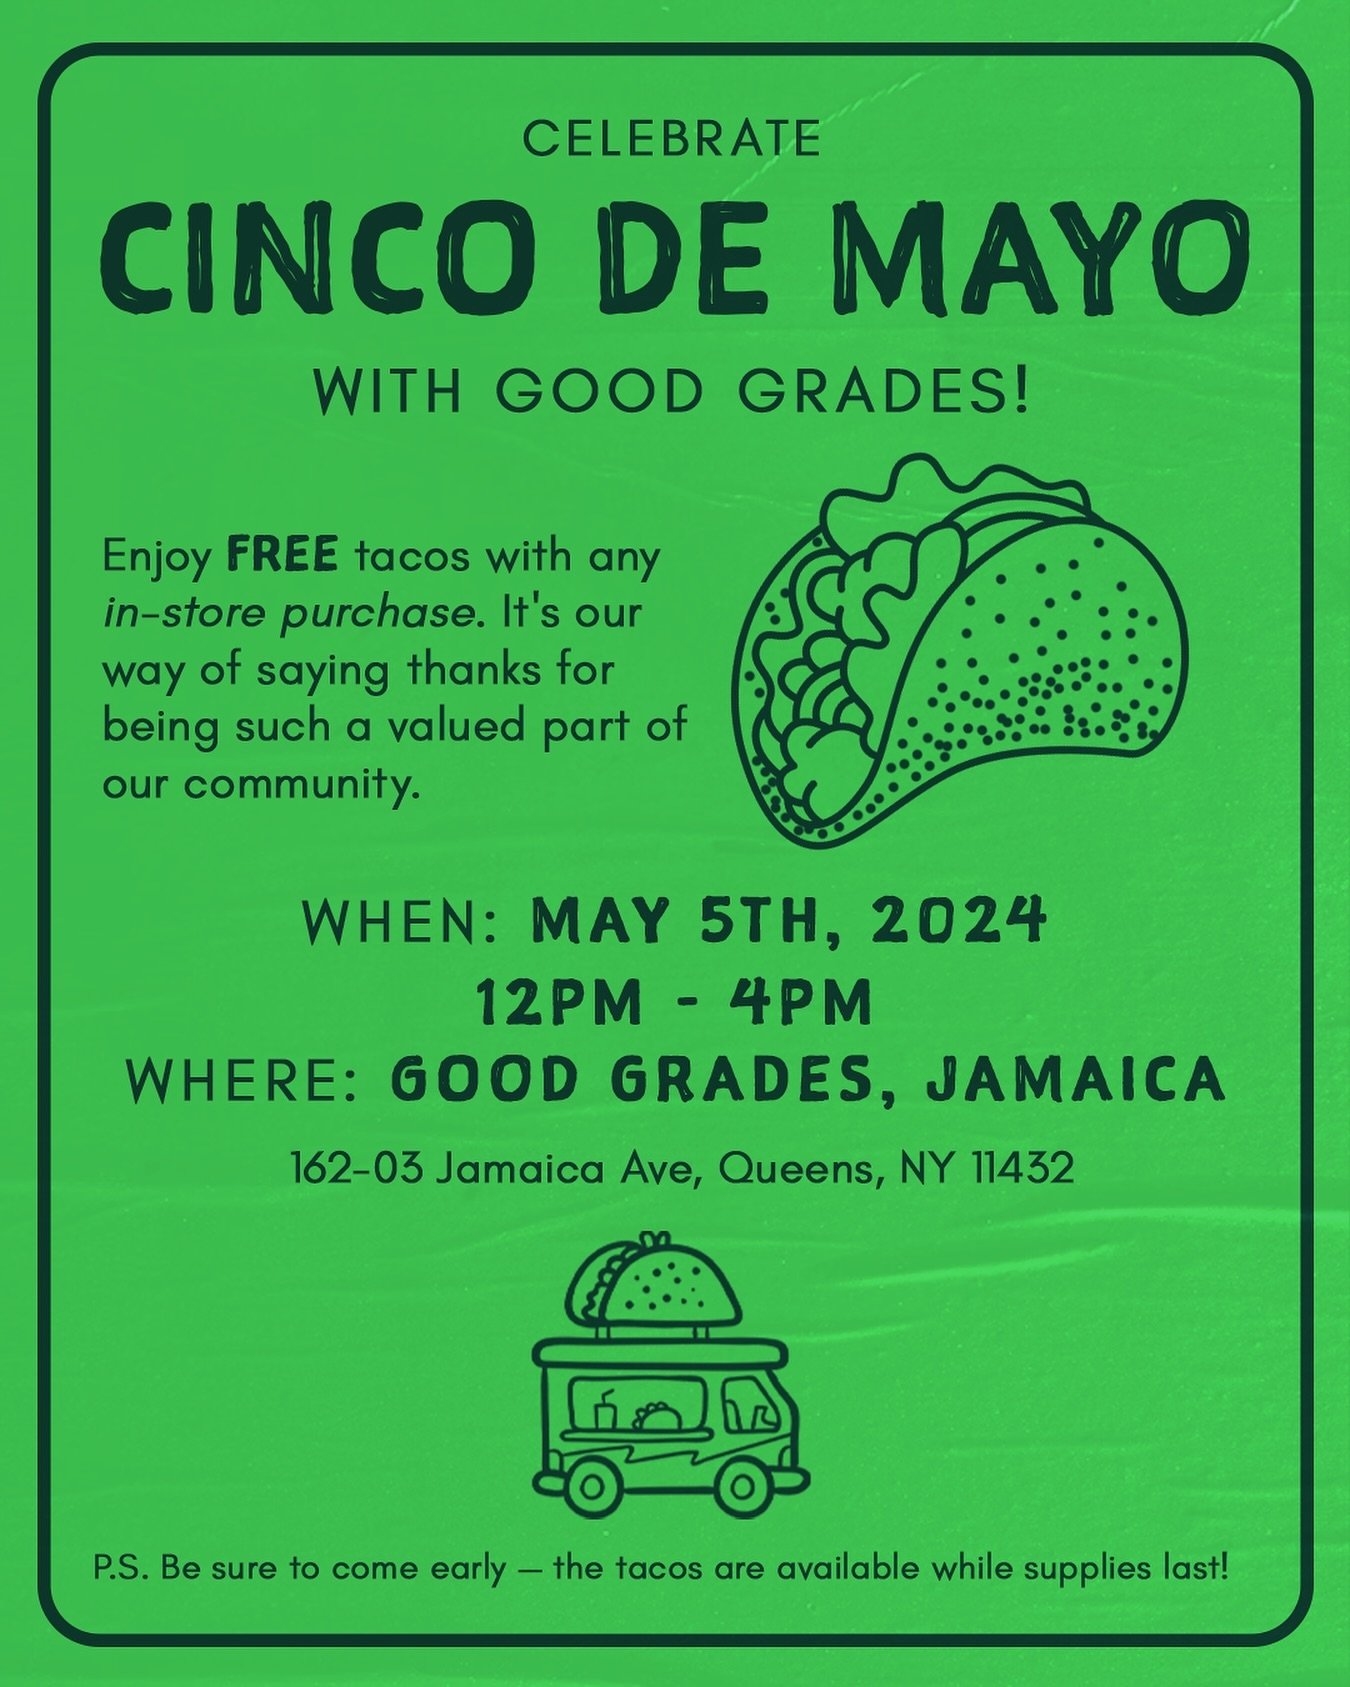 Who doesn&rsquo;t love FREE tacos 🌮 

#tacotuesday #freetacos #cincodemayo #goodgrades #jamaicaave